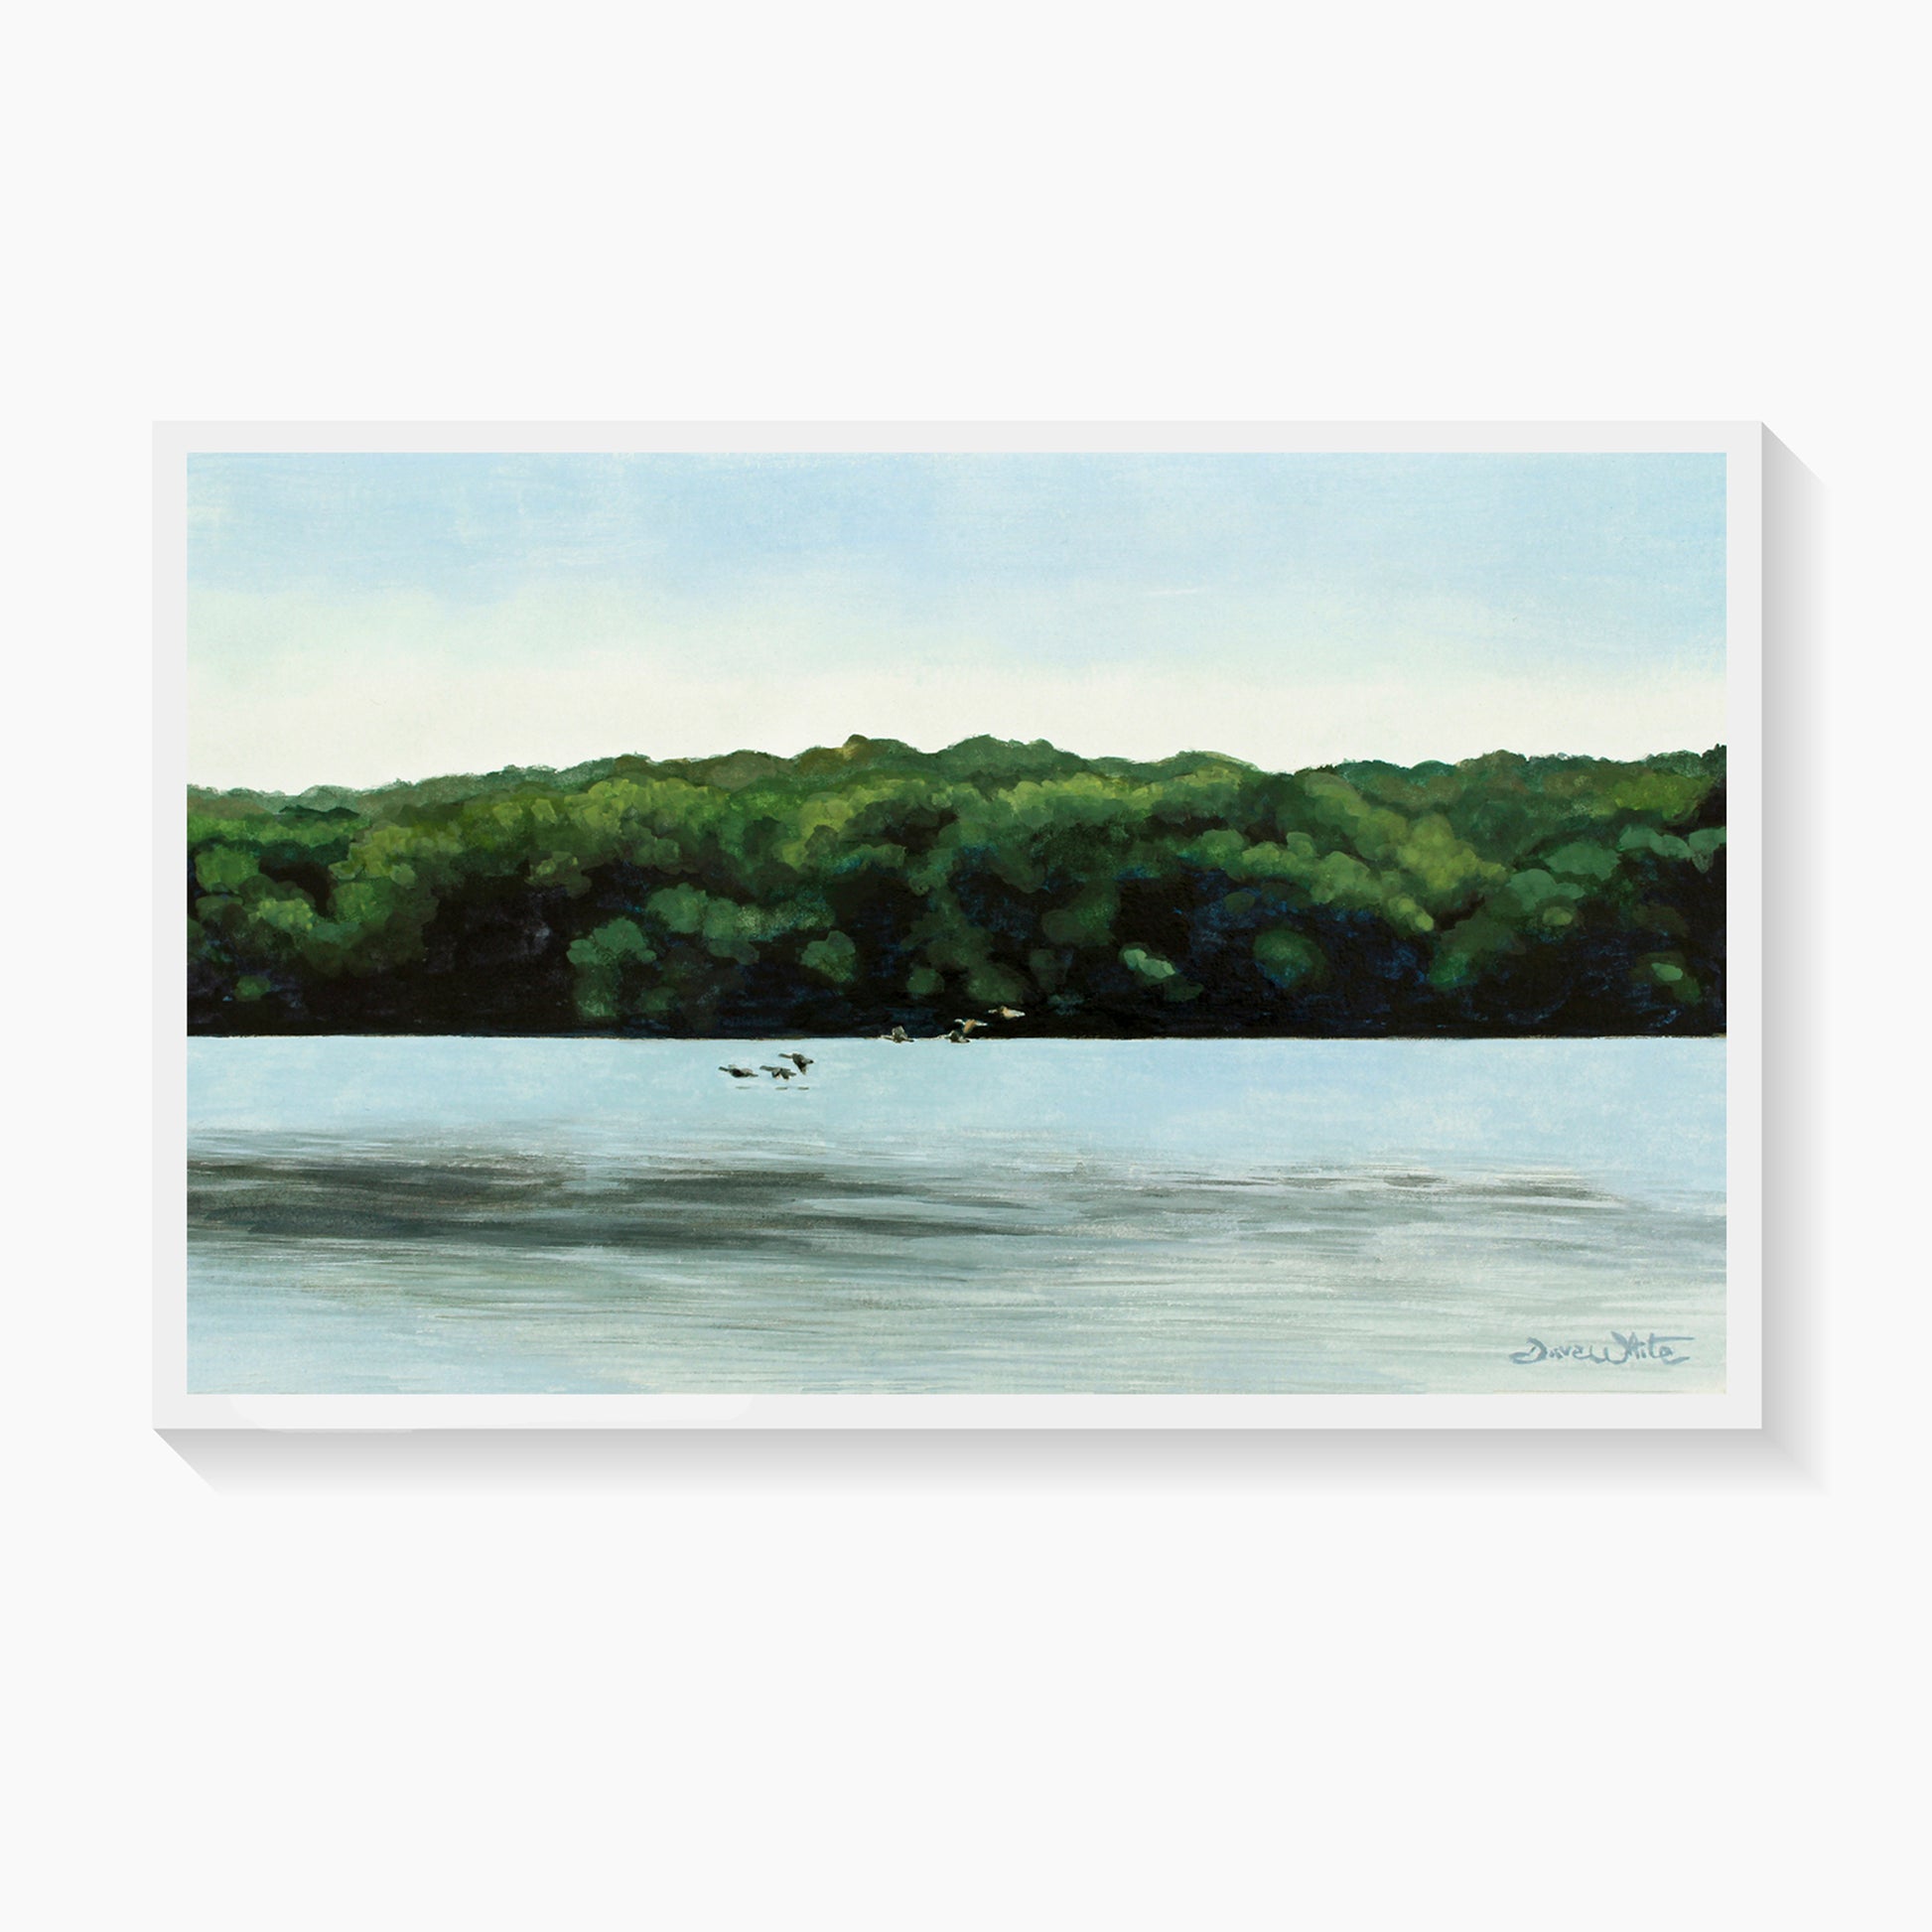 Potomac River Art Print of Geese by Artist Dave White